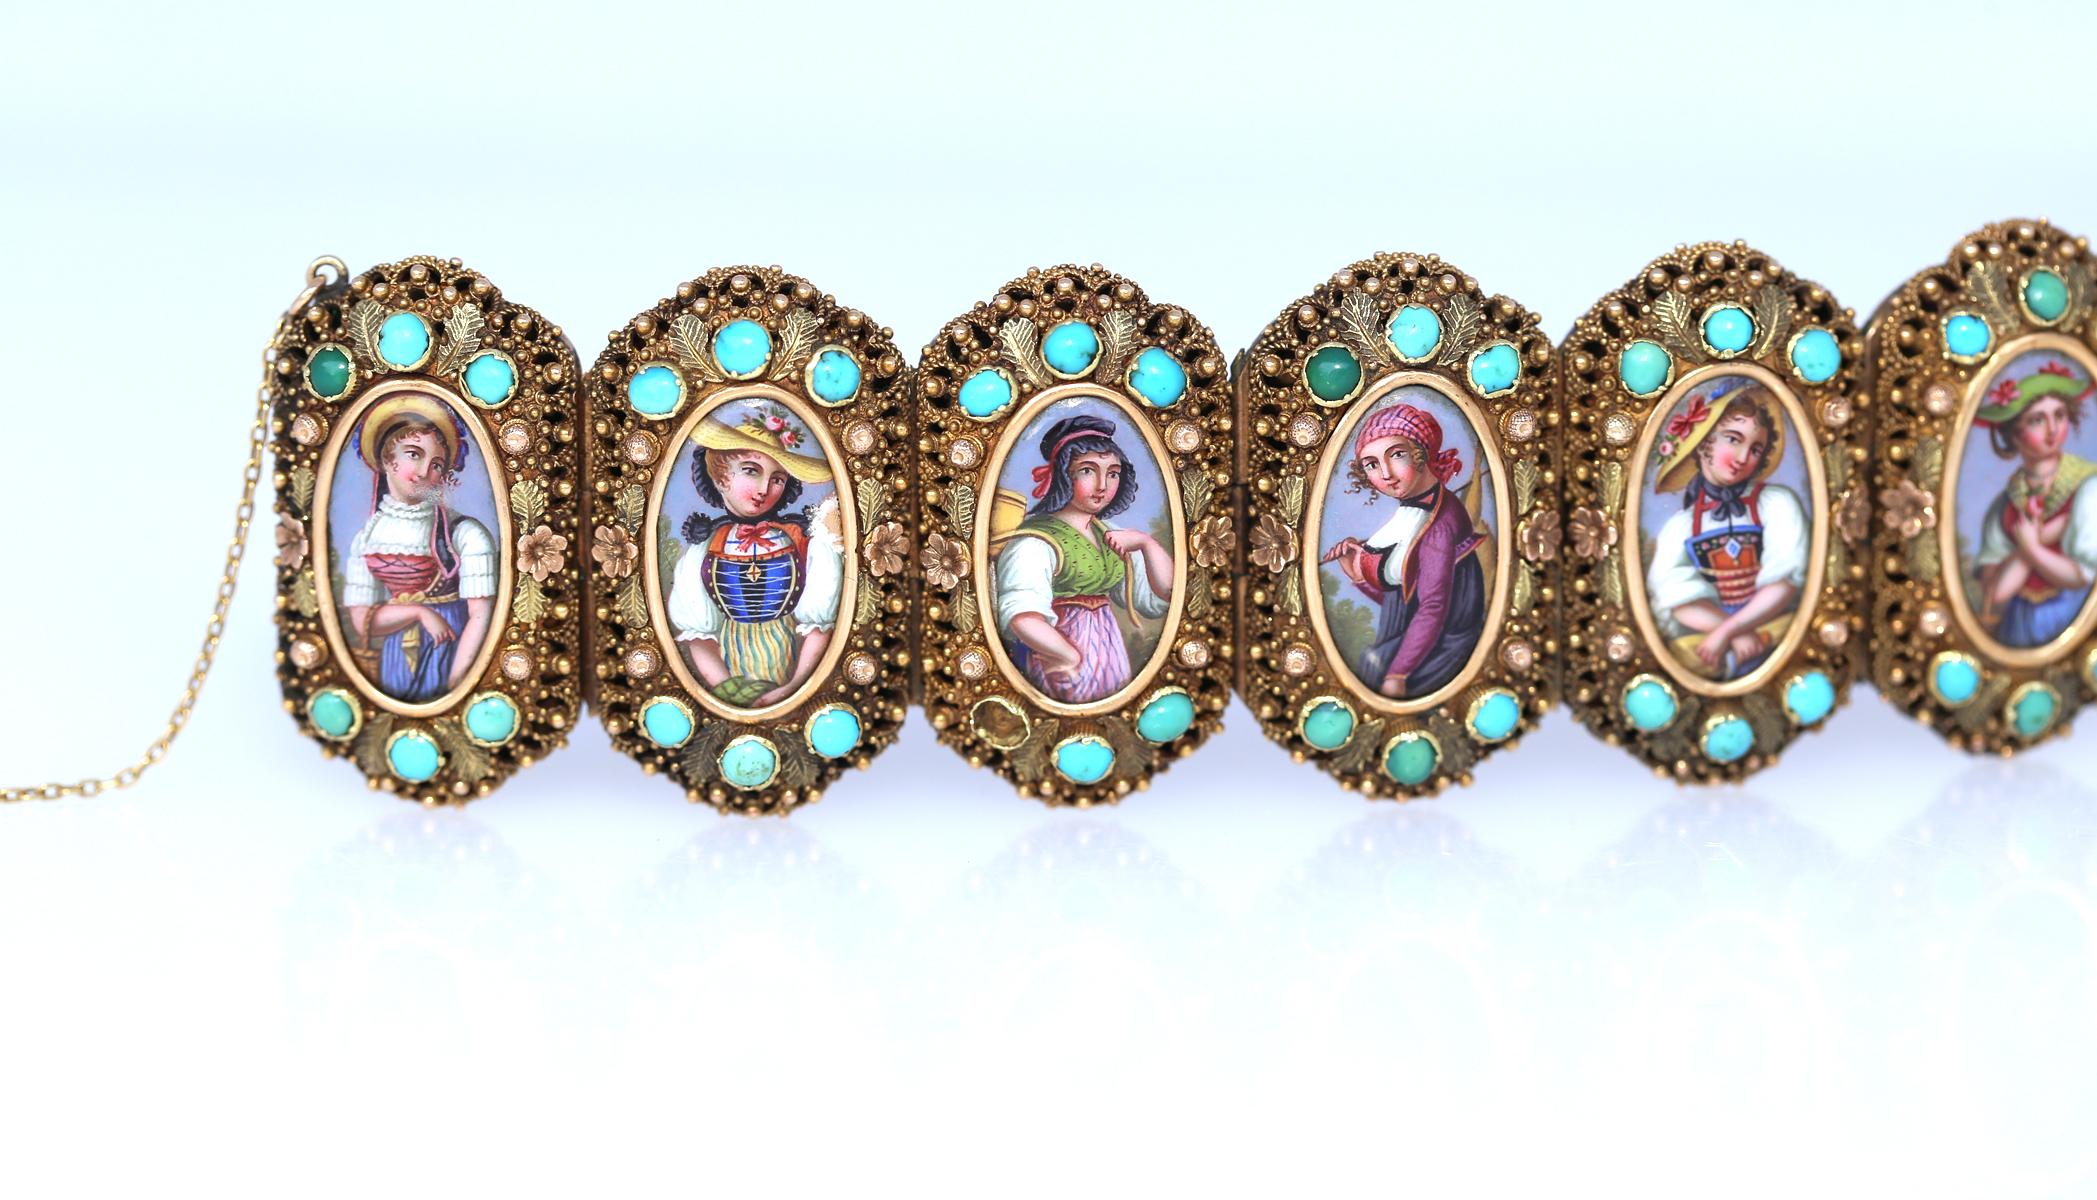  Locket Gold Bracelet Swiss Cantons Hand-Painted Ladies Turquoise, 1860 4